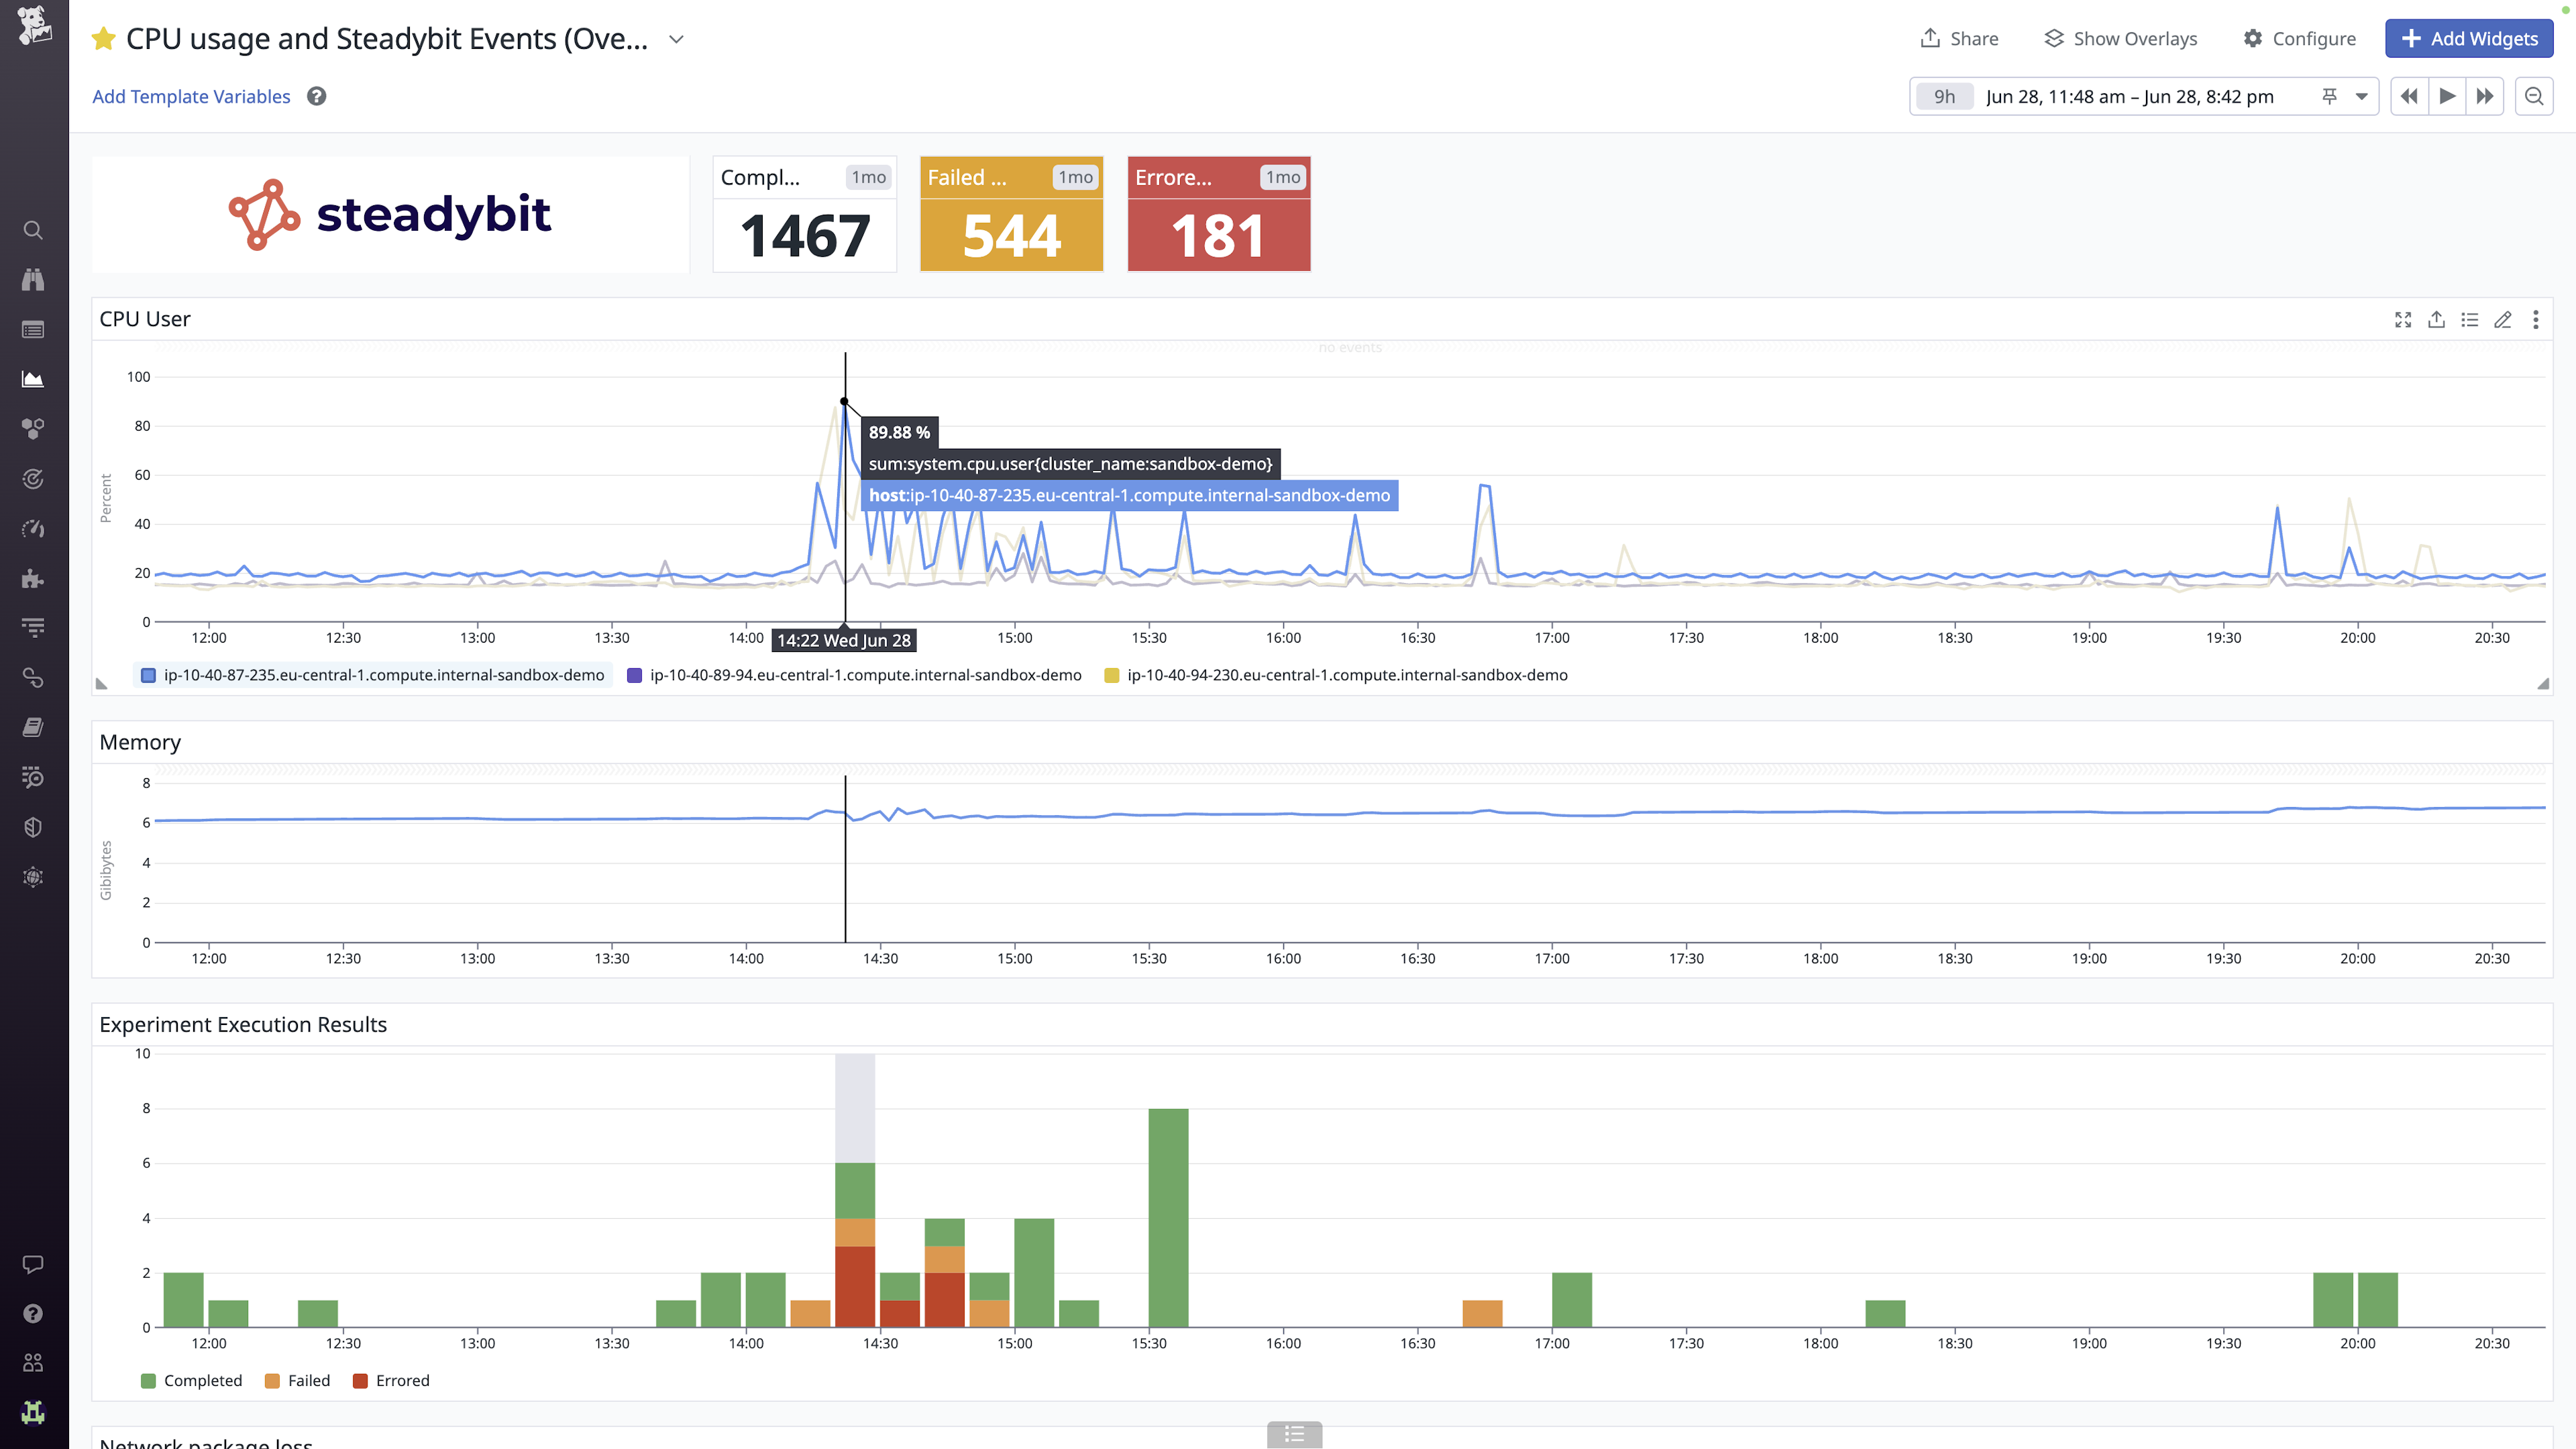 DataDog dashboard helps to get an overview of all running experiments and their timing.